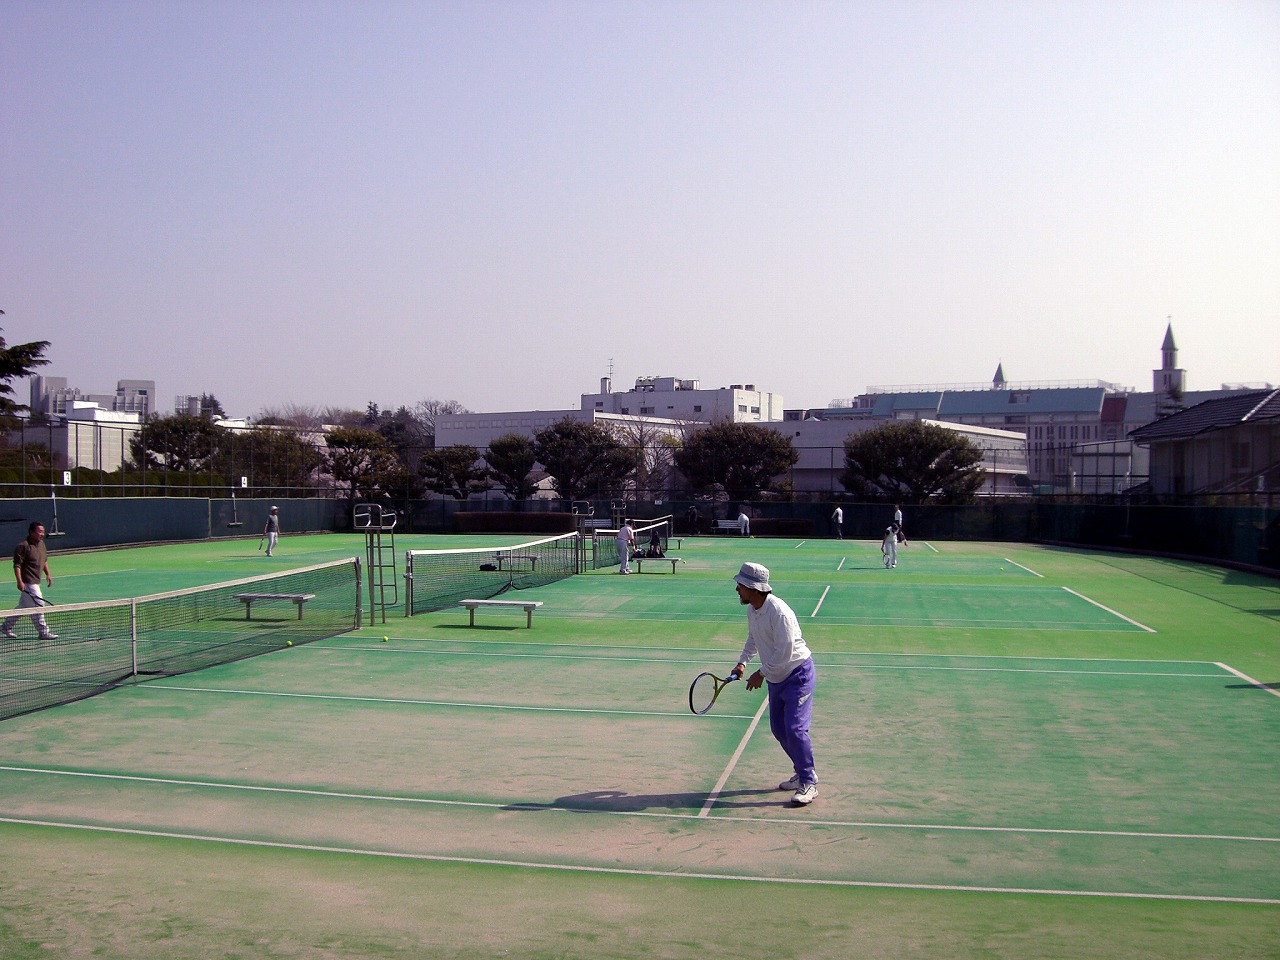 Tennis court in Yamate park